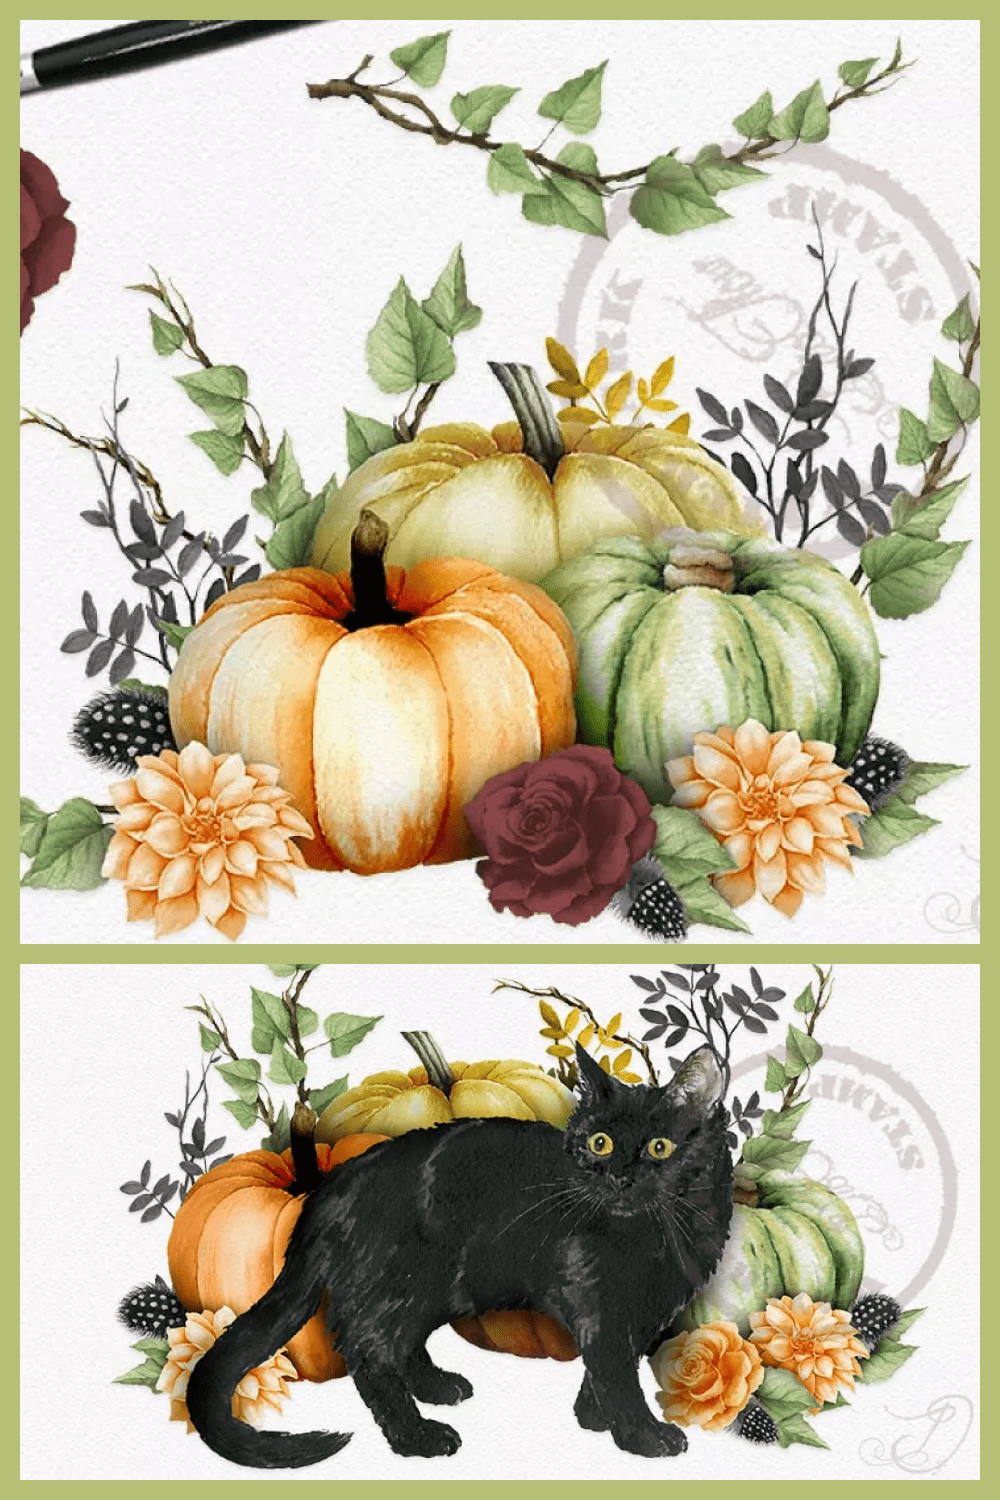 Drawn black cat on a background of yellow, orange and green pumpkins and flowers.